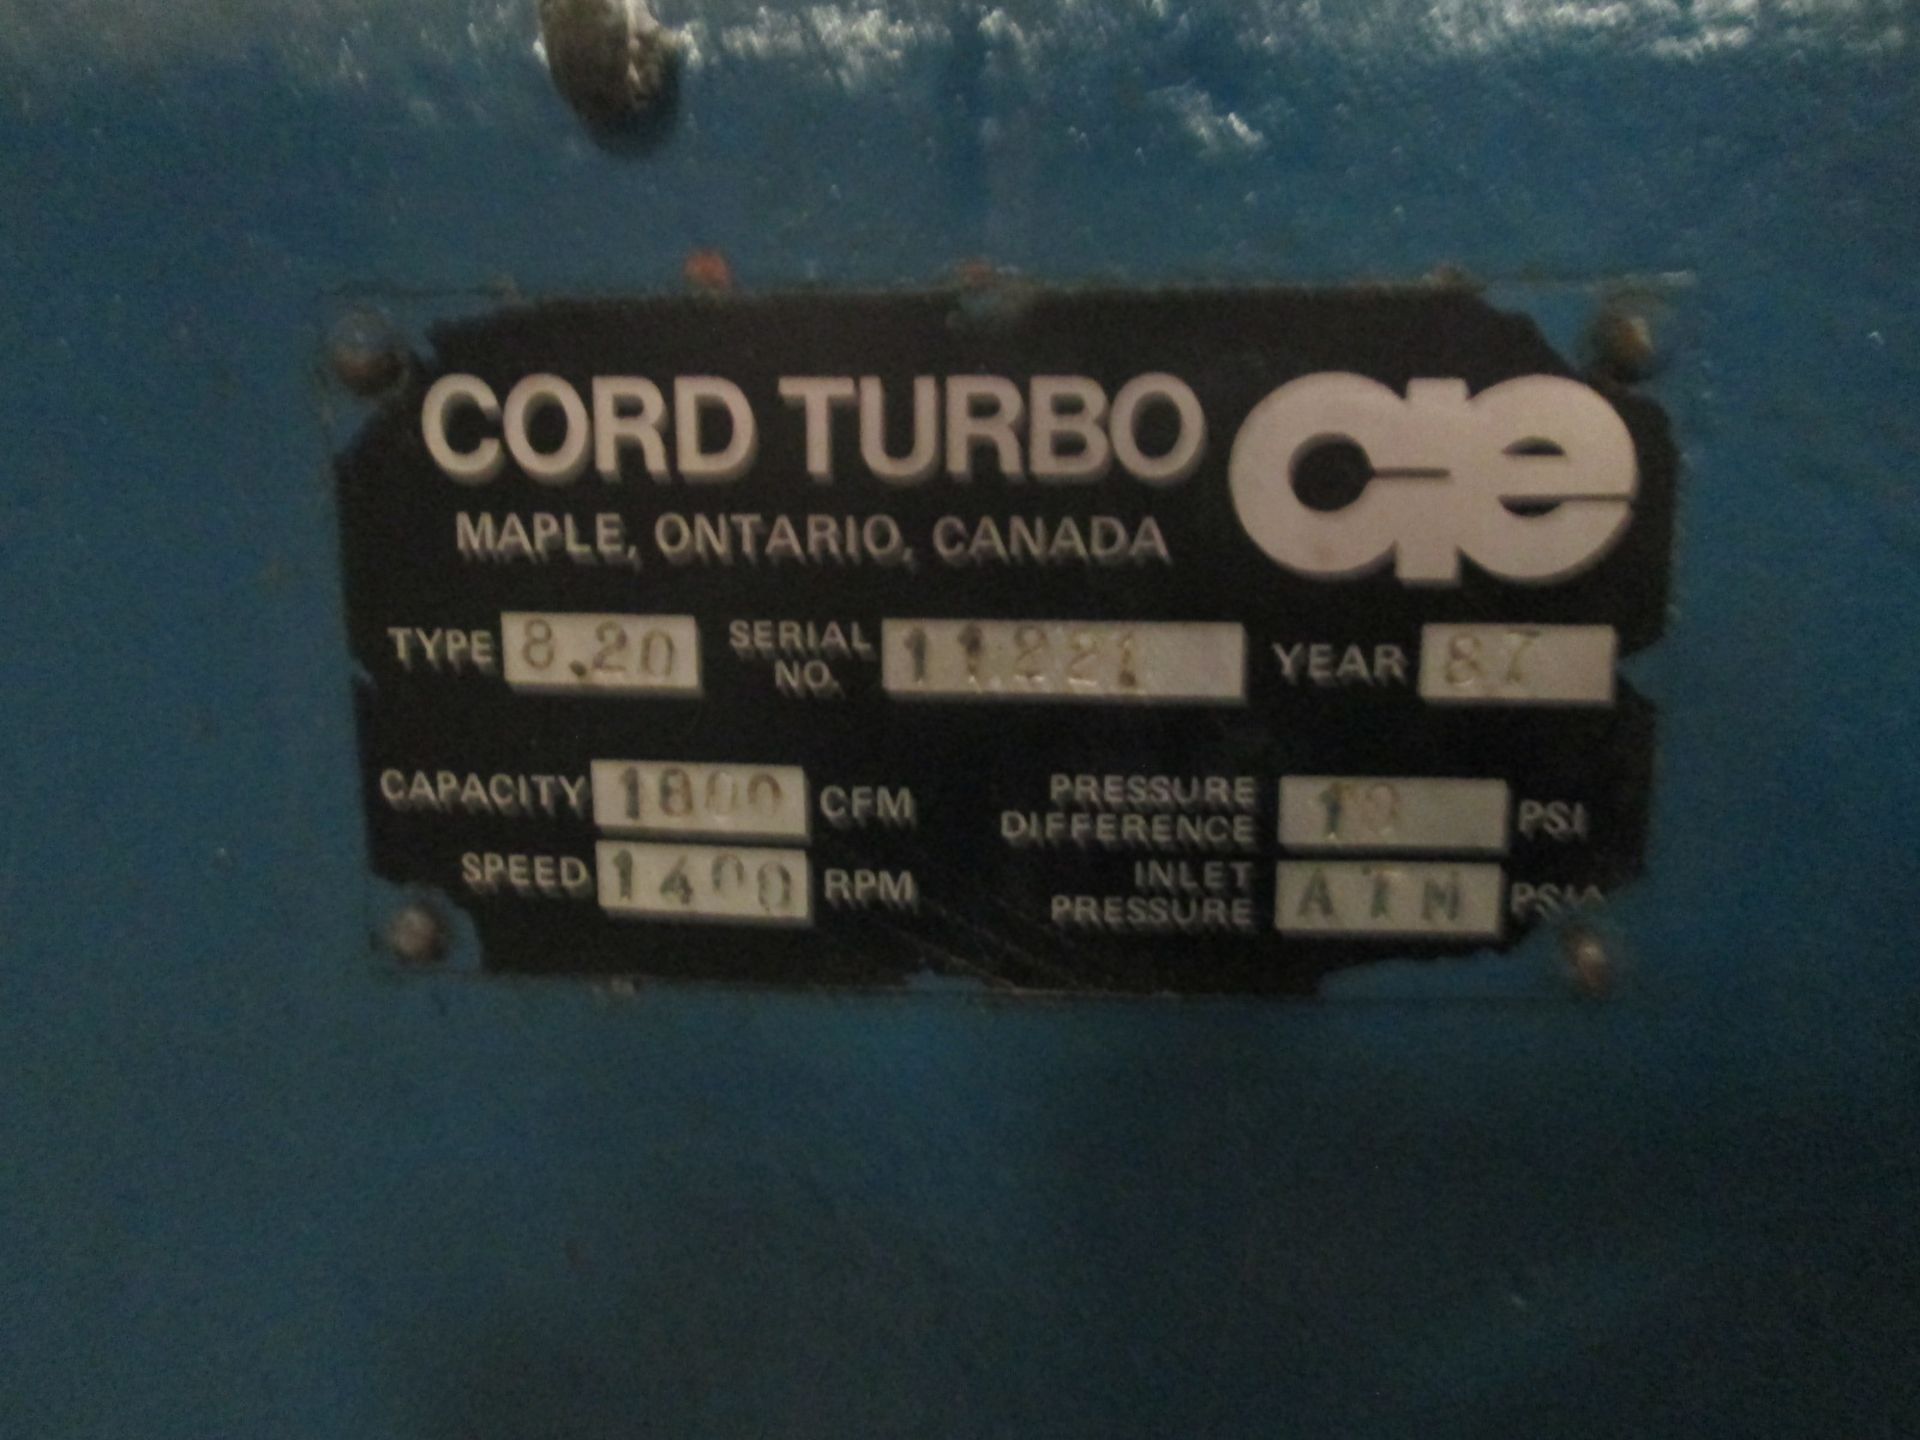 Cord Turbo Blower, Type 8.20 Serial 11221 1800 CFM - Image 6 of 6